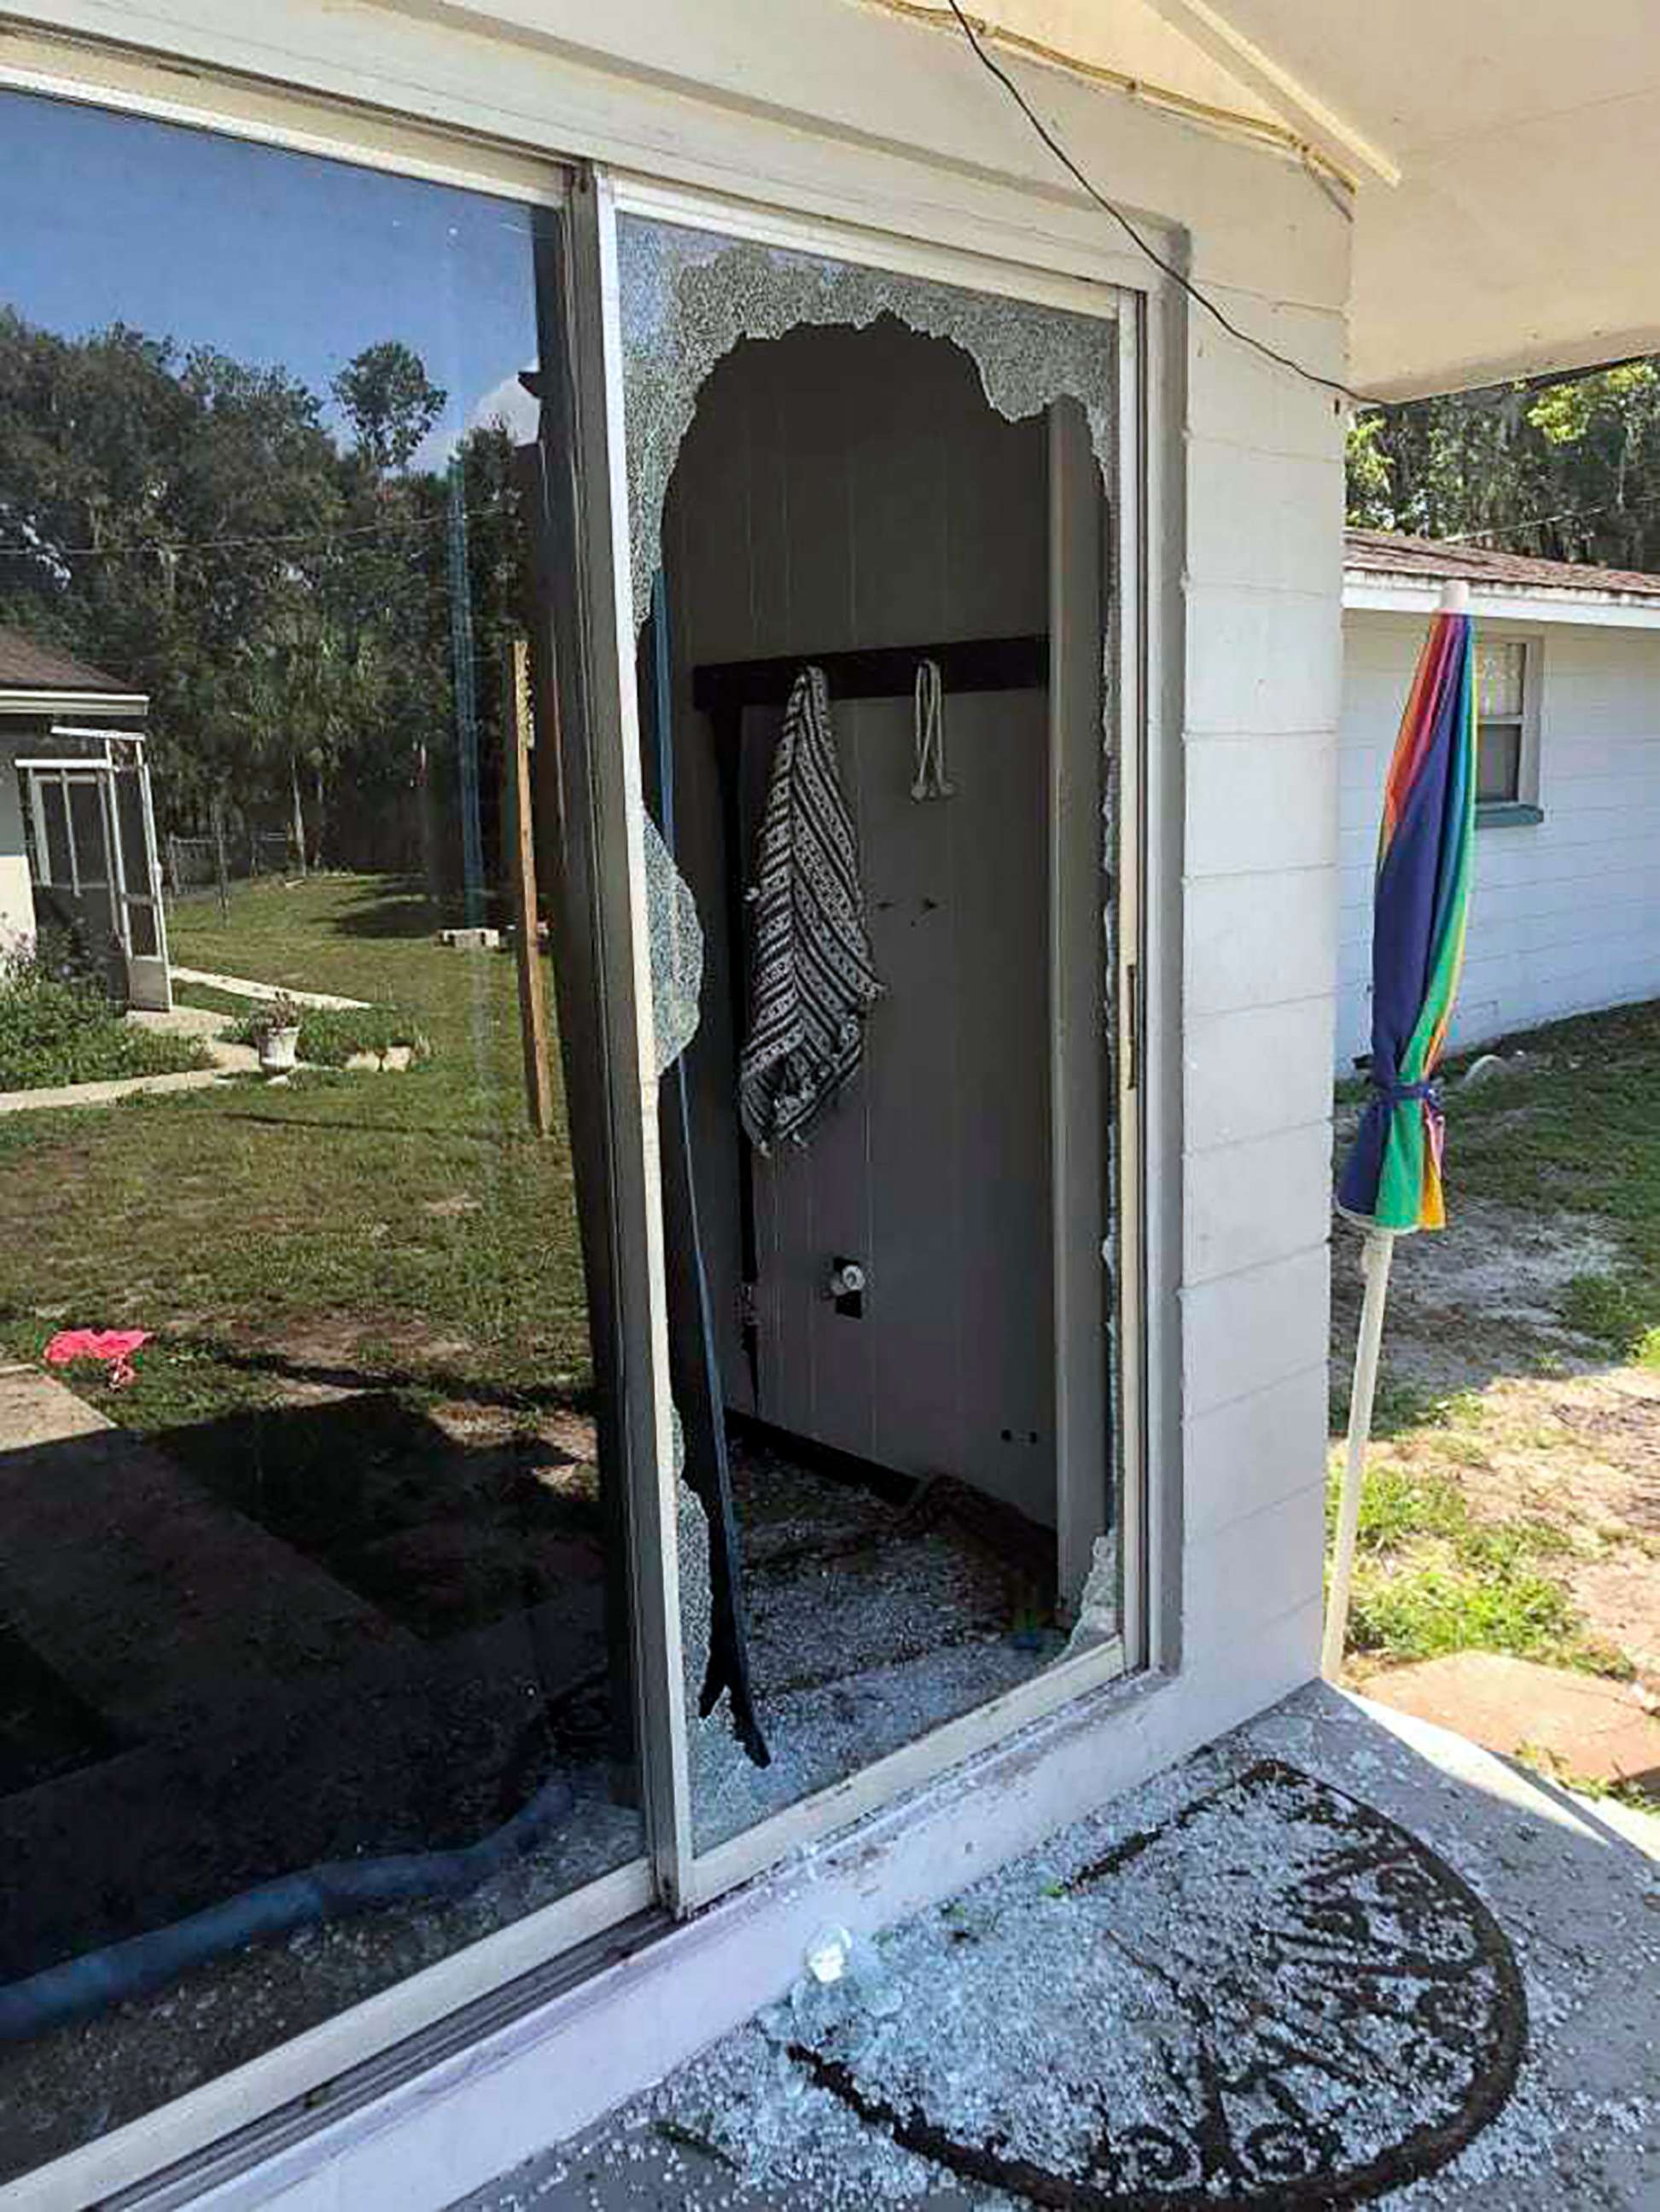 PHOTO: Damage to the back of a Polk County, Fla., house is pictured in an image provided by the Polk County Sheriff's Office showing where a sheriff's lieutenant entered the house and exchanged fire with a suspect in Lakeland, Fla., Sept. 5, 2021.